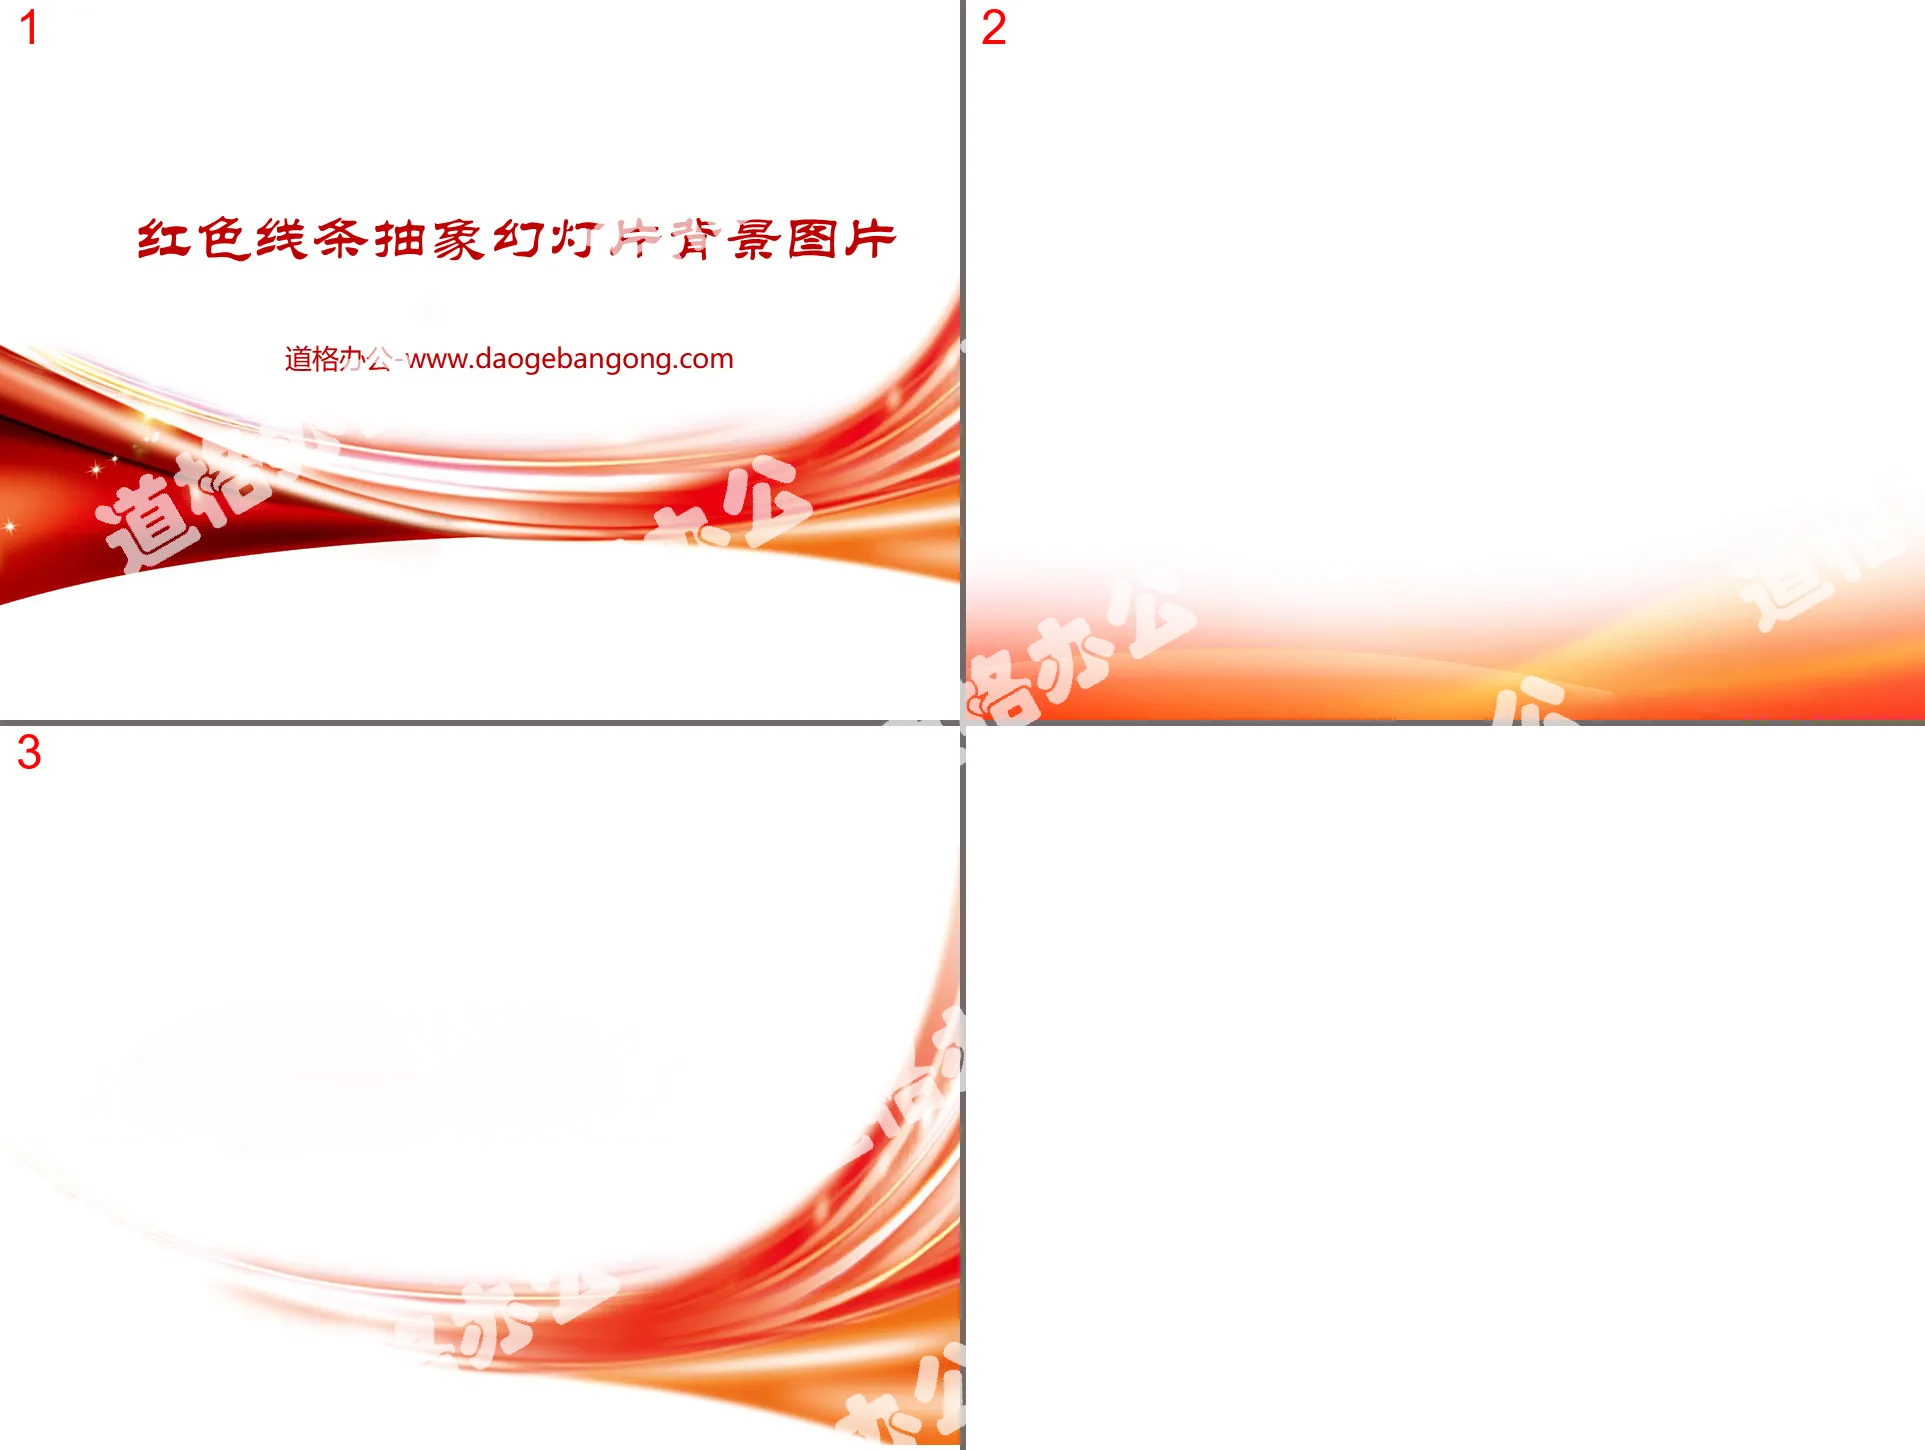 3 abstract PPT background pictures composed of red colorful curves